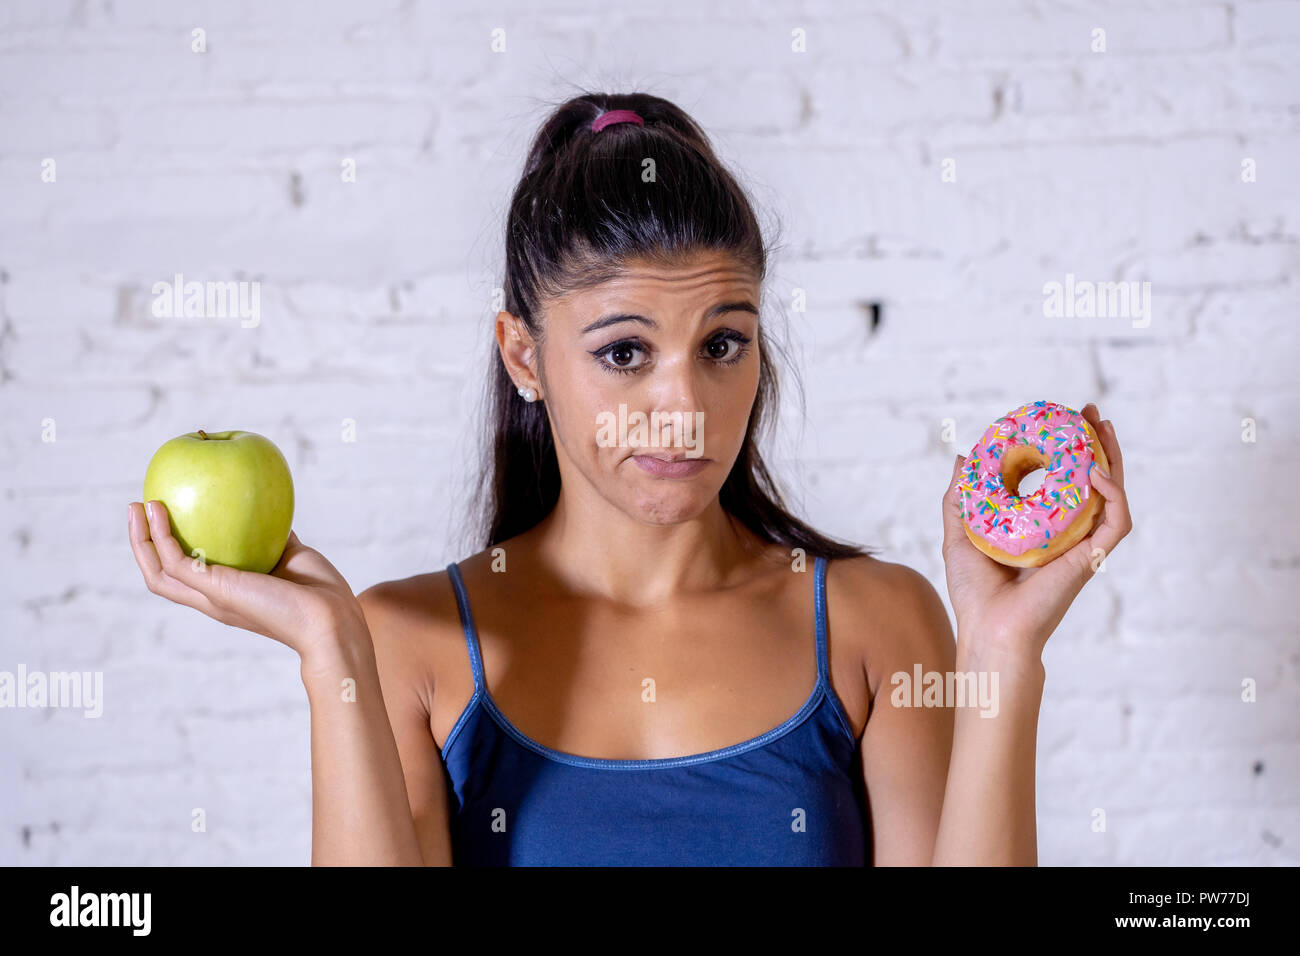 Beautiful young woman tempted having to make choice between apple and doughnut in healthy unhealthy food, detox eating, calories and diet concept. Stock Photo